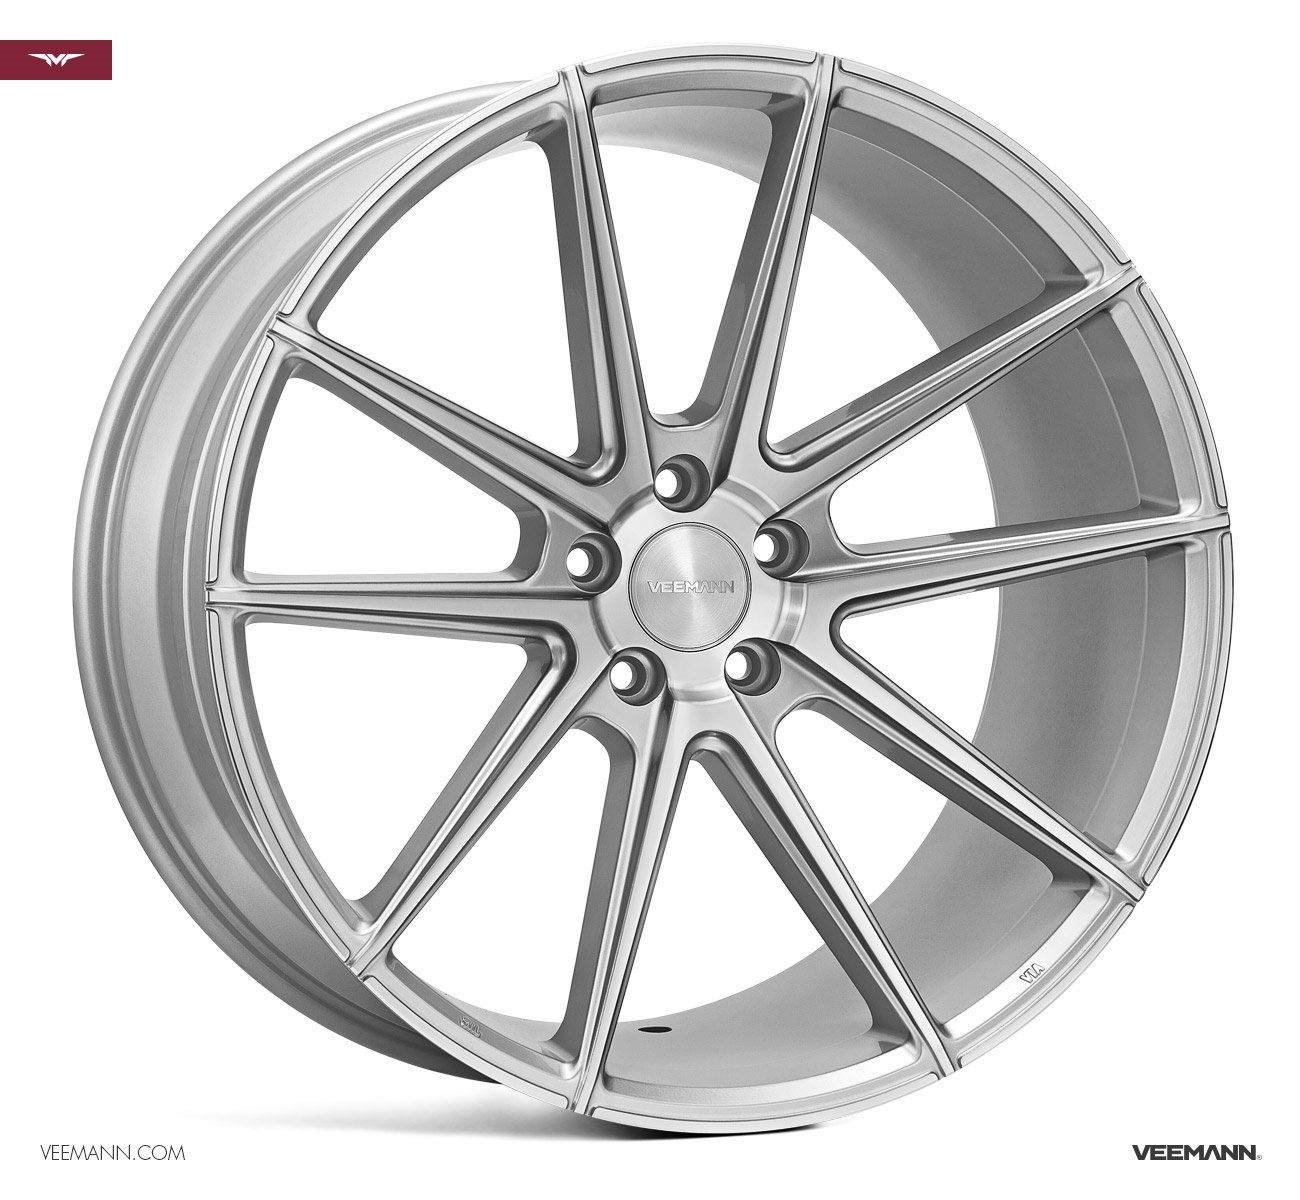 NEW 21  VEEMANN V FS4 ALLOY WHEELS IN SILVER WITH POLISHED FACE  DEEPER CONCAVE 10 5  ALL ROUND